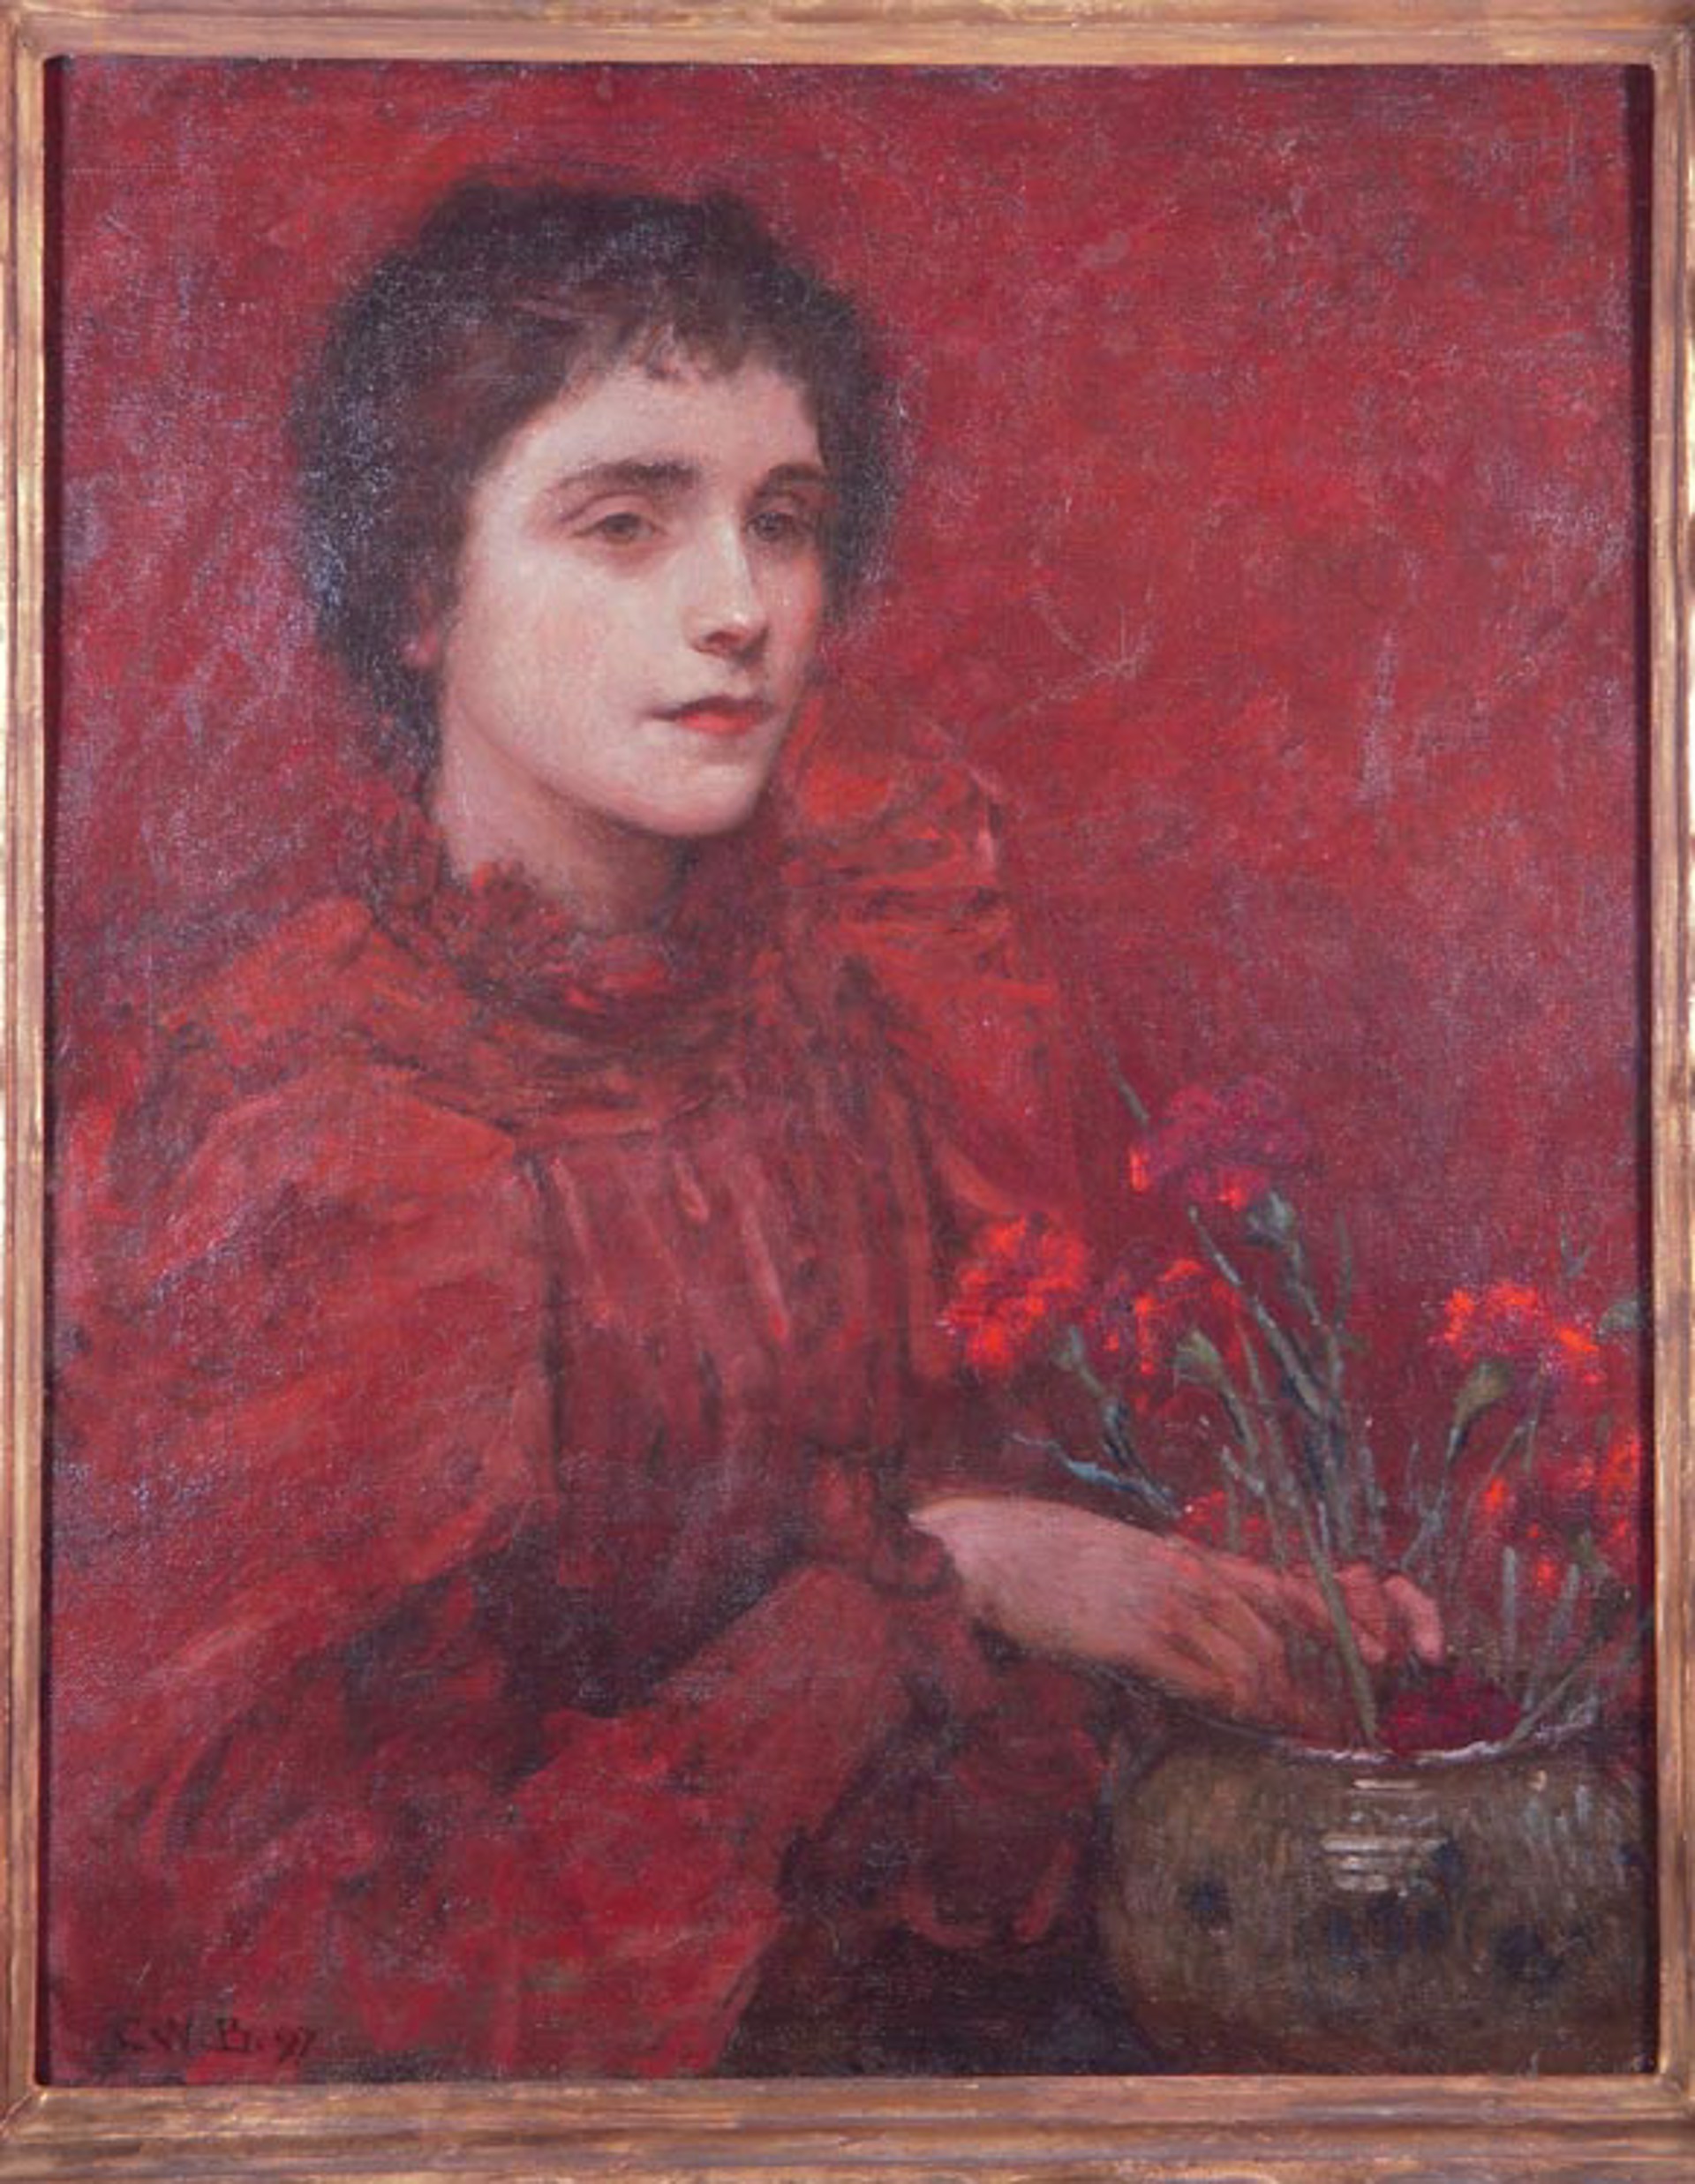 Study in Red by Charles Bartlett